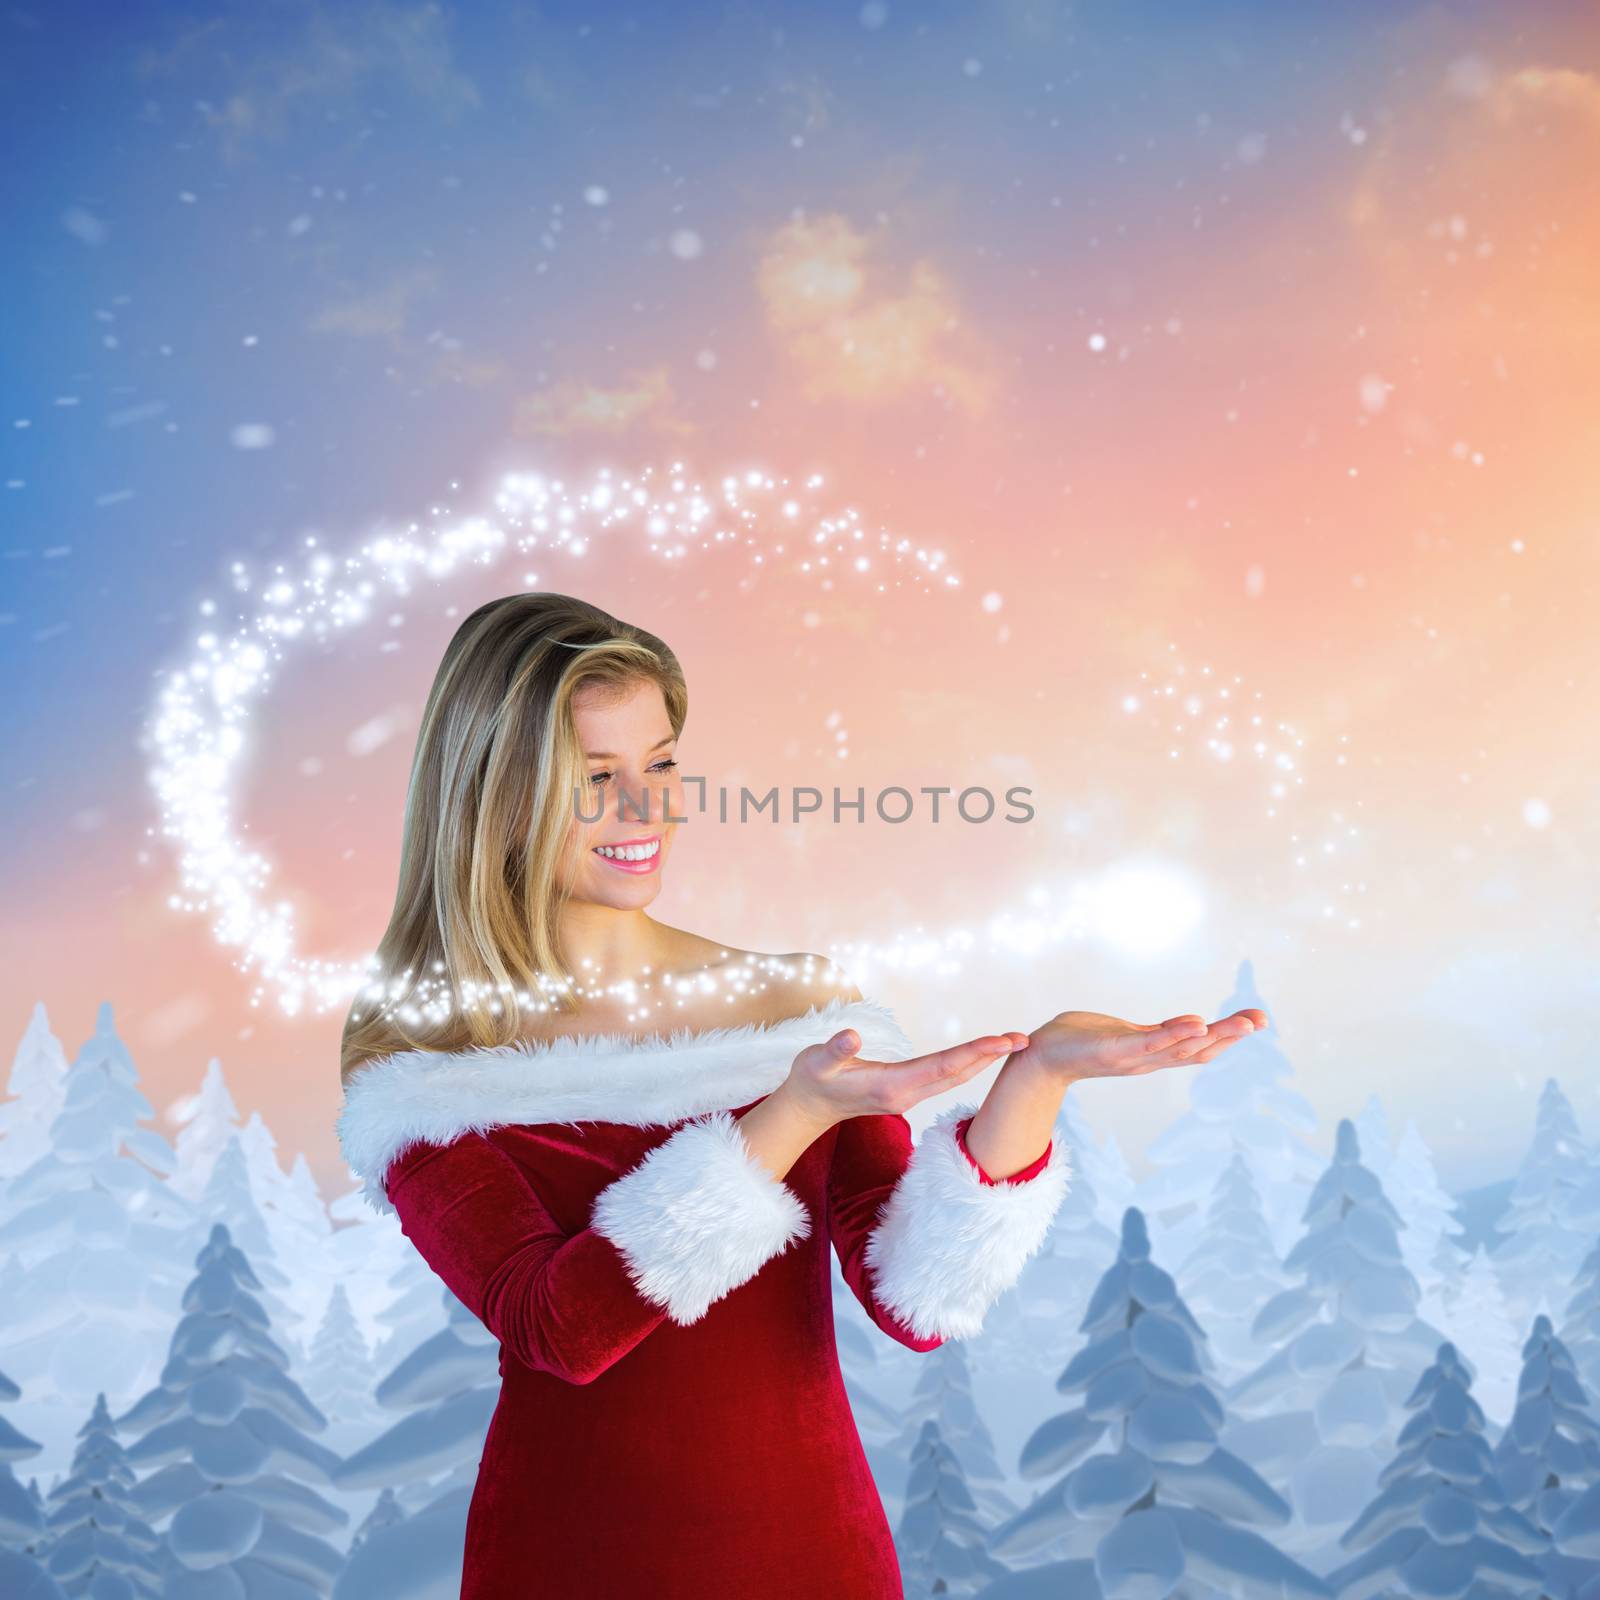 Pretty girl presenting in santa outfit against snow falling on fir tree forest